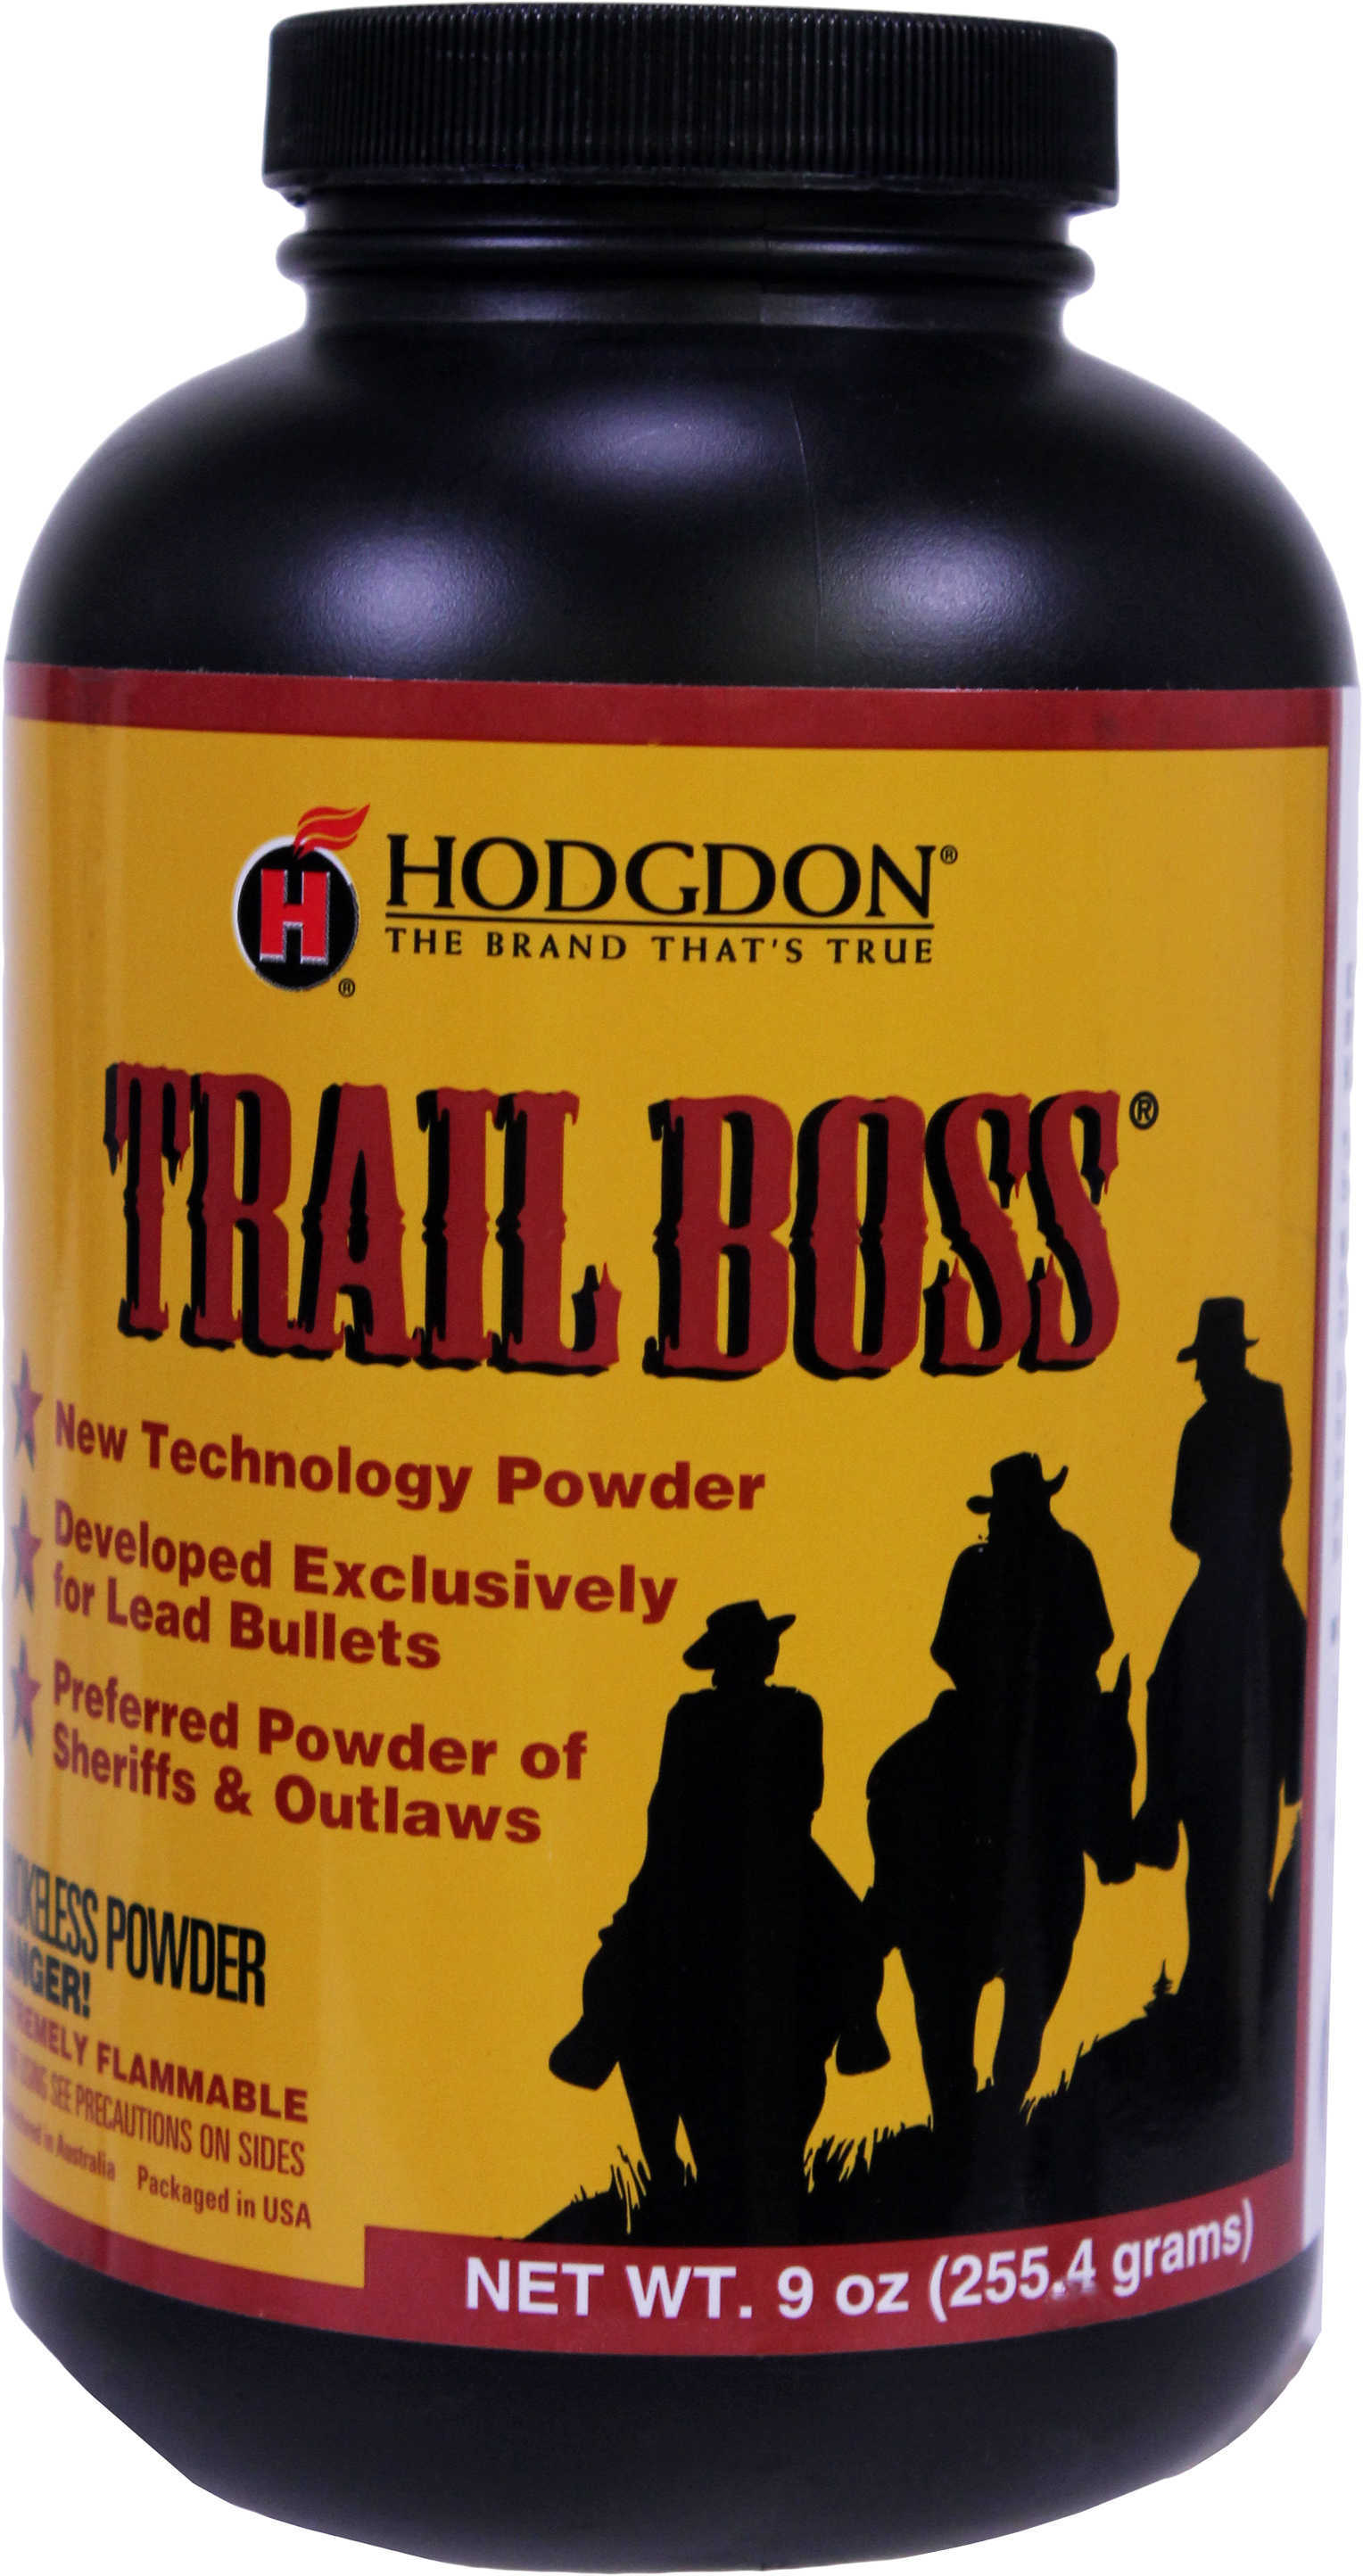 Cowboy Action Shooting With Trail Boss Smokeless Powder